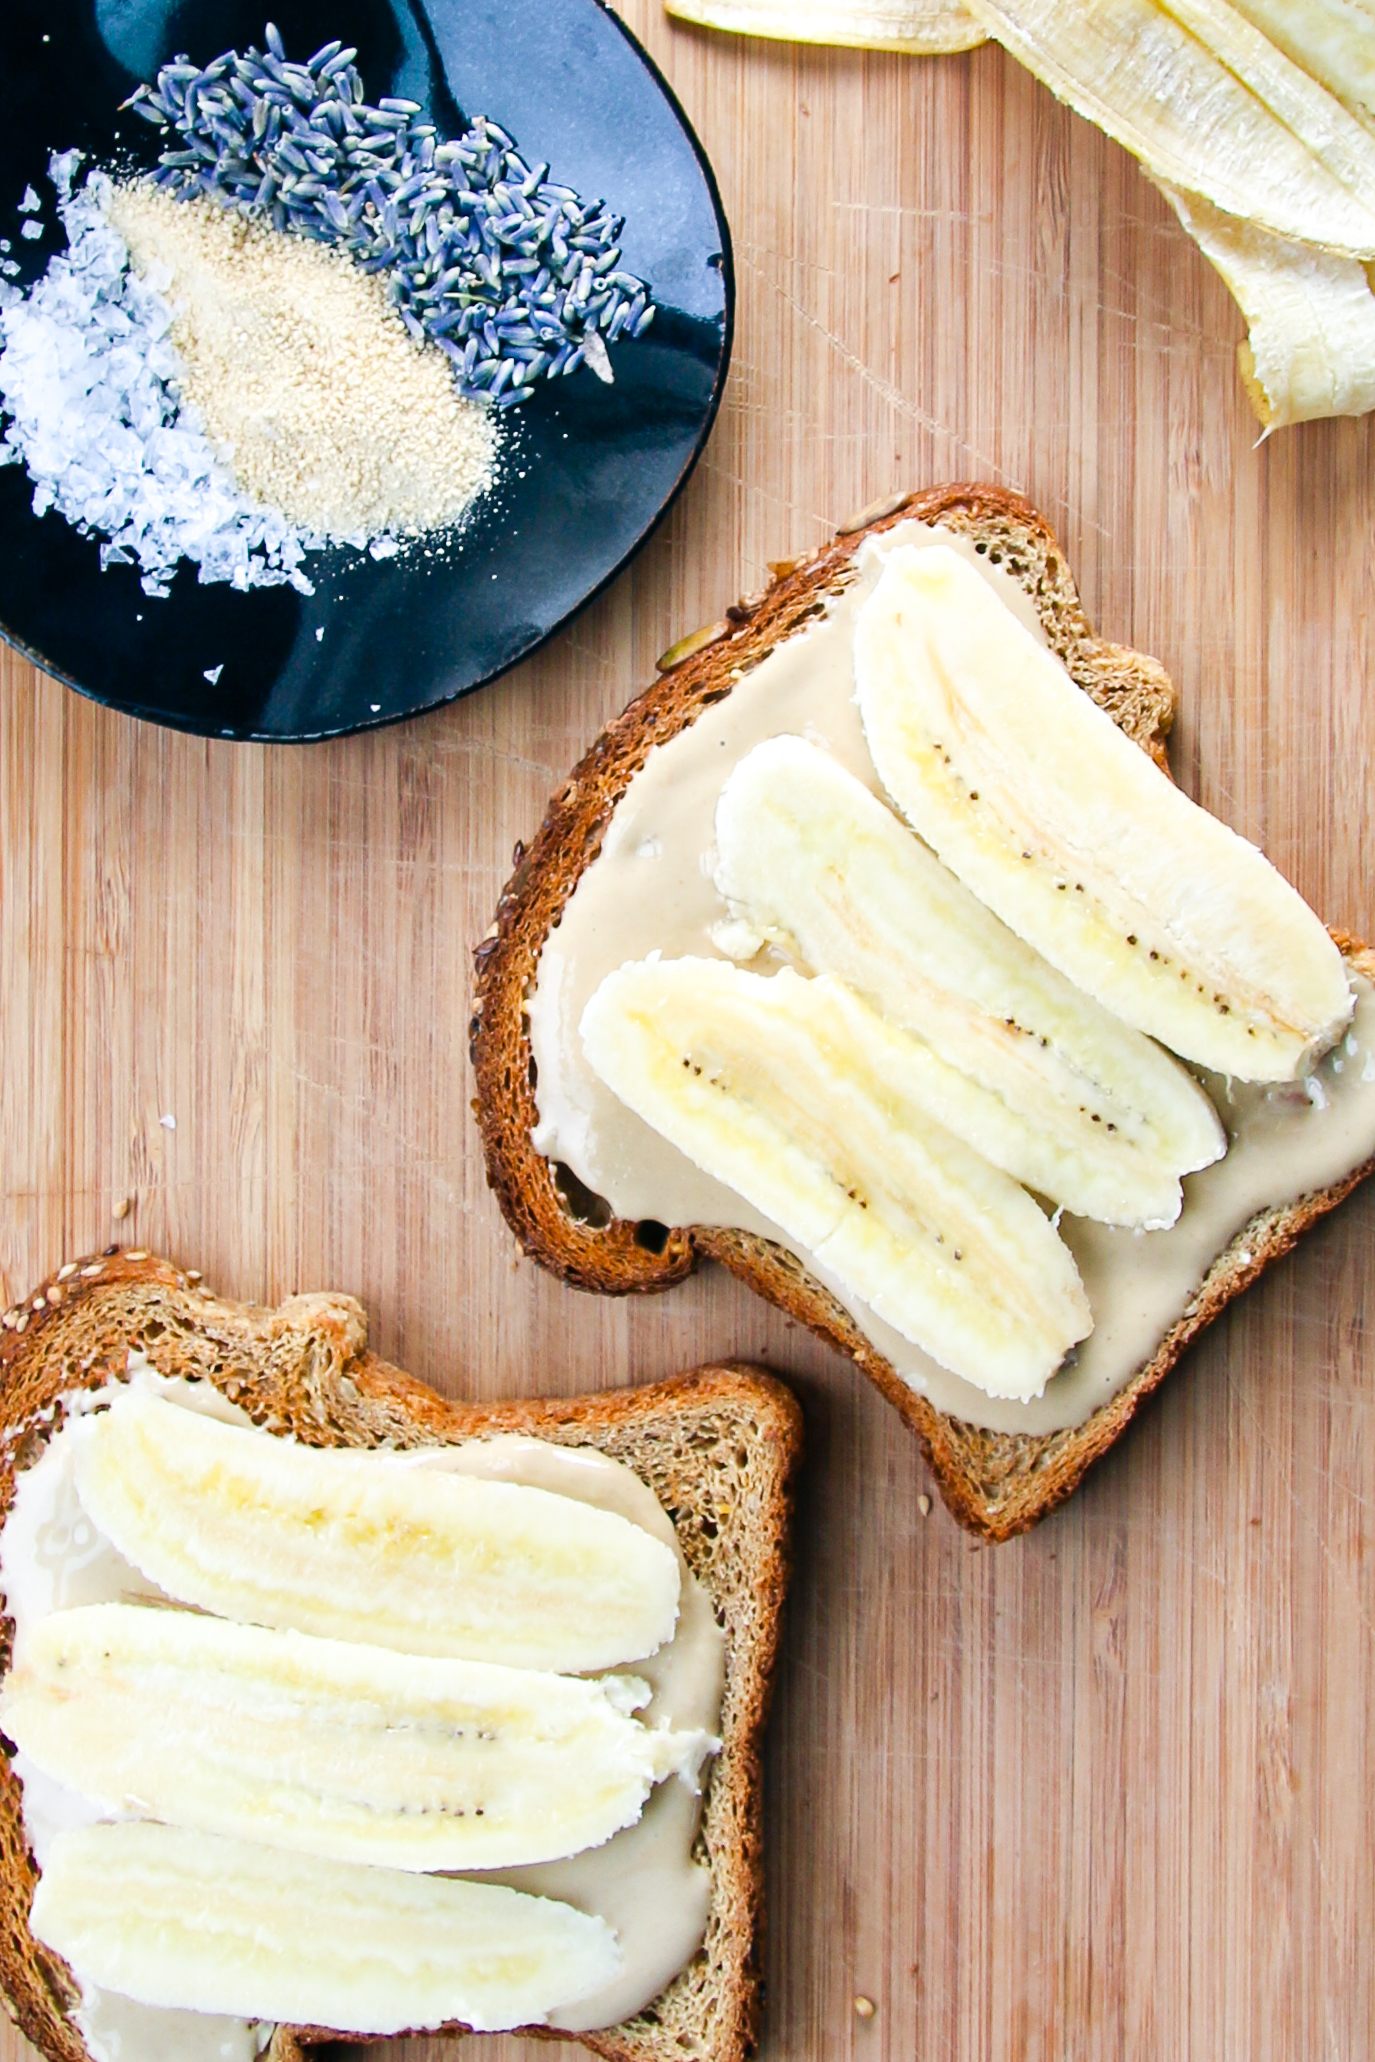 Honey Lavender Sesame Toast with Bananas | I Will Not Eat Oysters